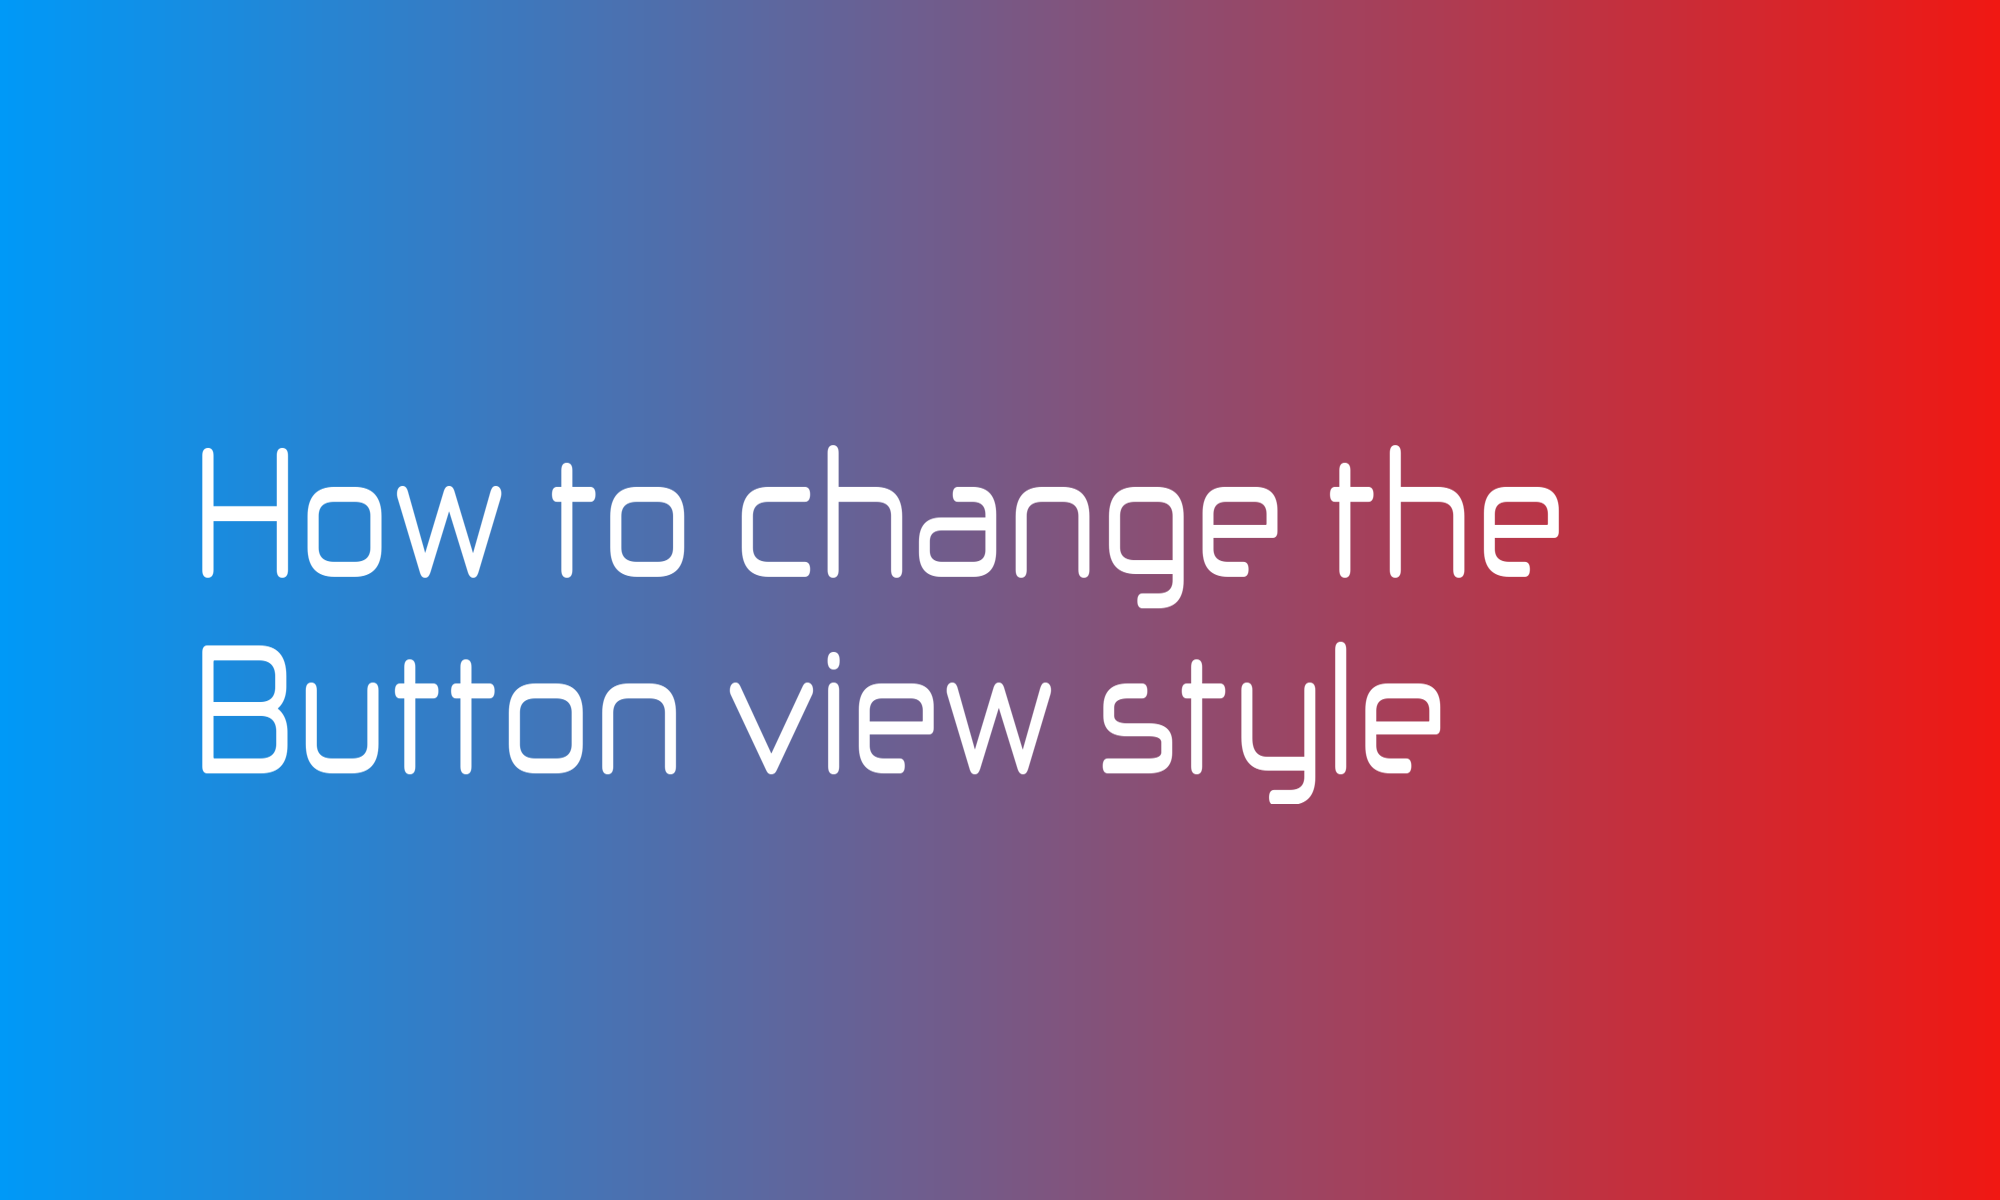 How to change the Button view style